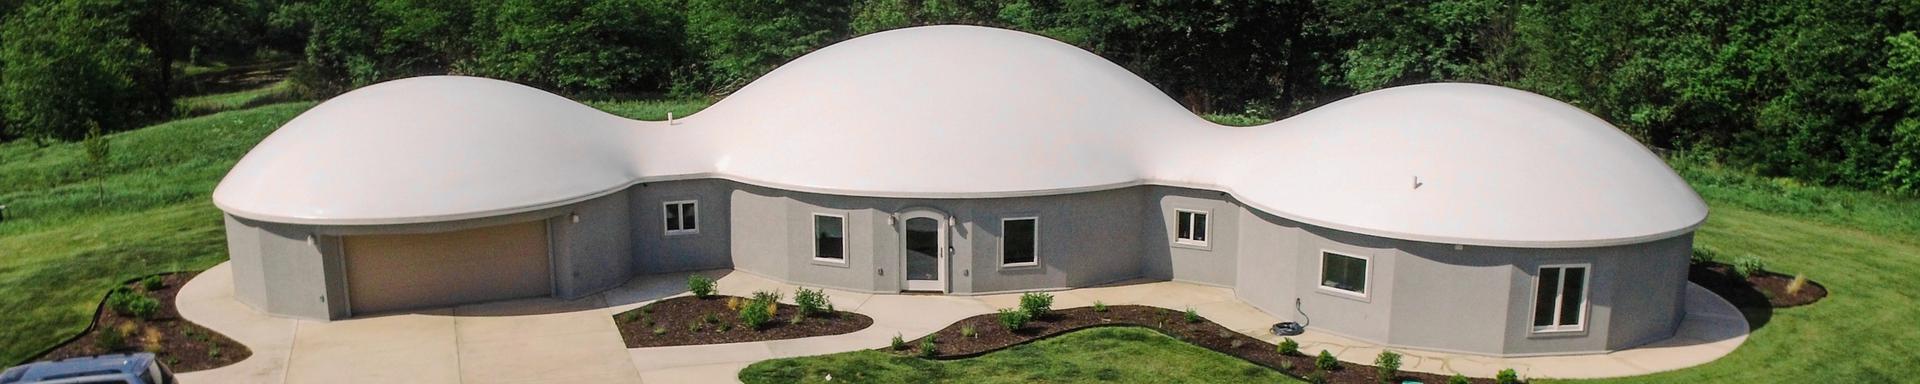 Three interconnected domes create the beautiful Shalom Dome home in Platte City, Missouri.